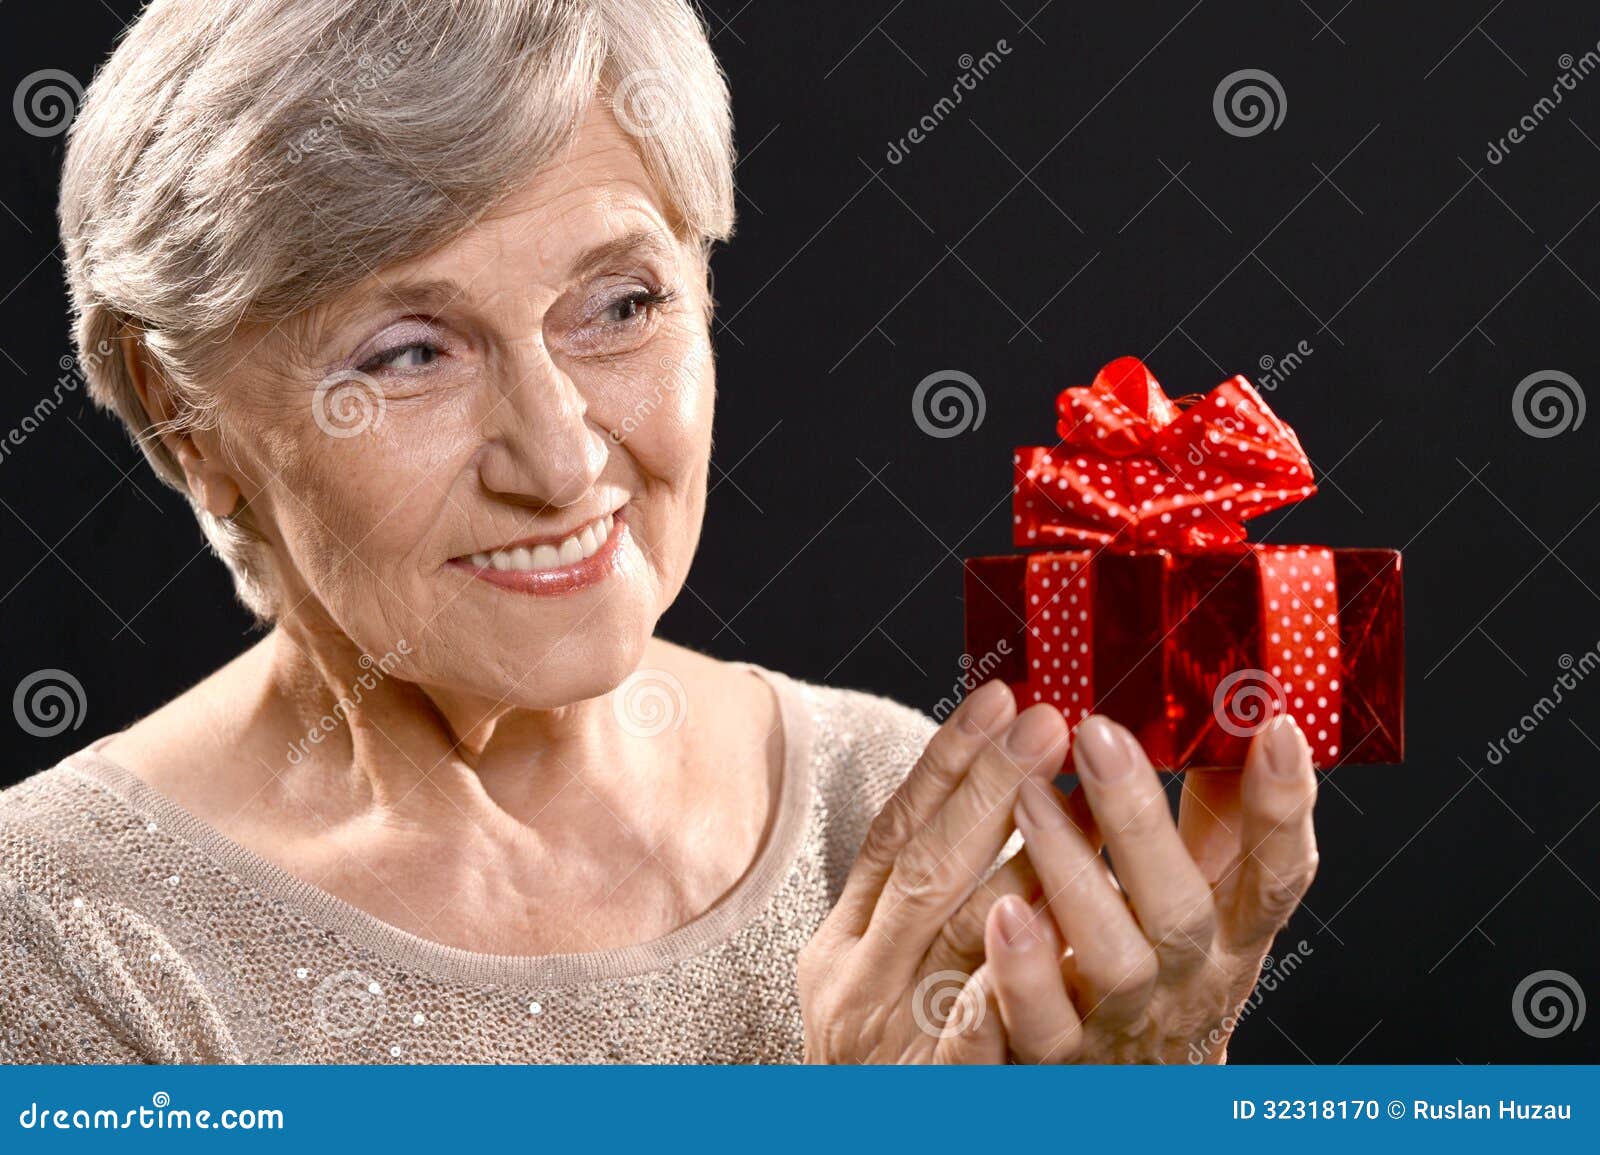 Elderly woman with a gift stock photo. Image of aged - 32318170